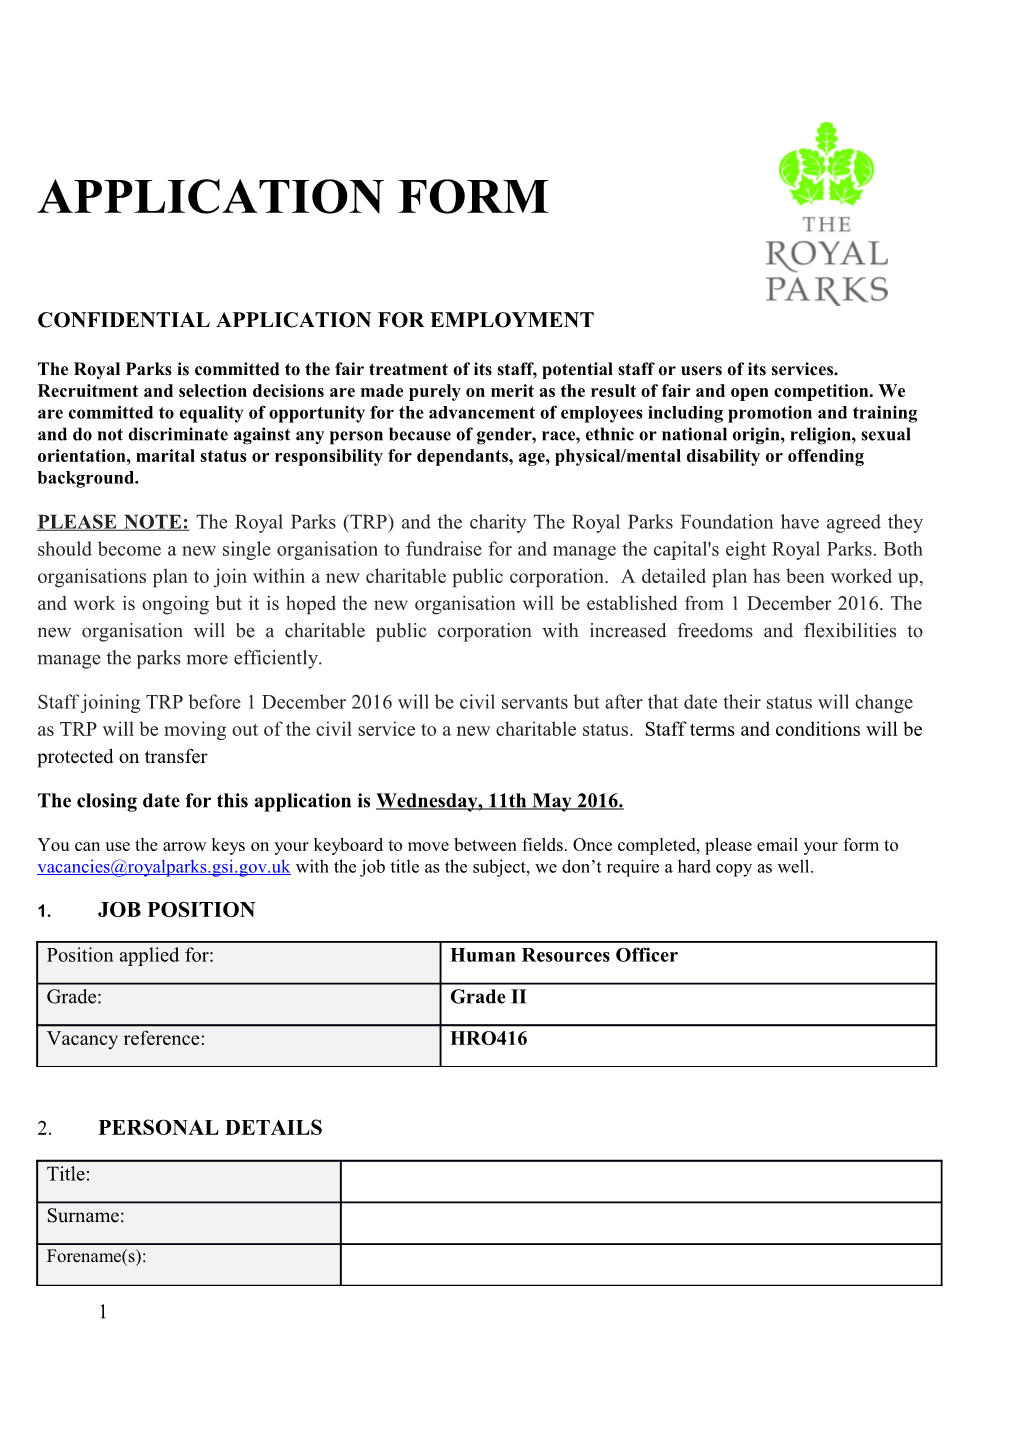 Confidential Application for Employment s4